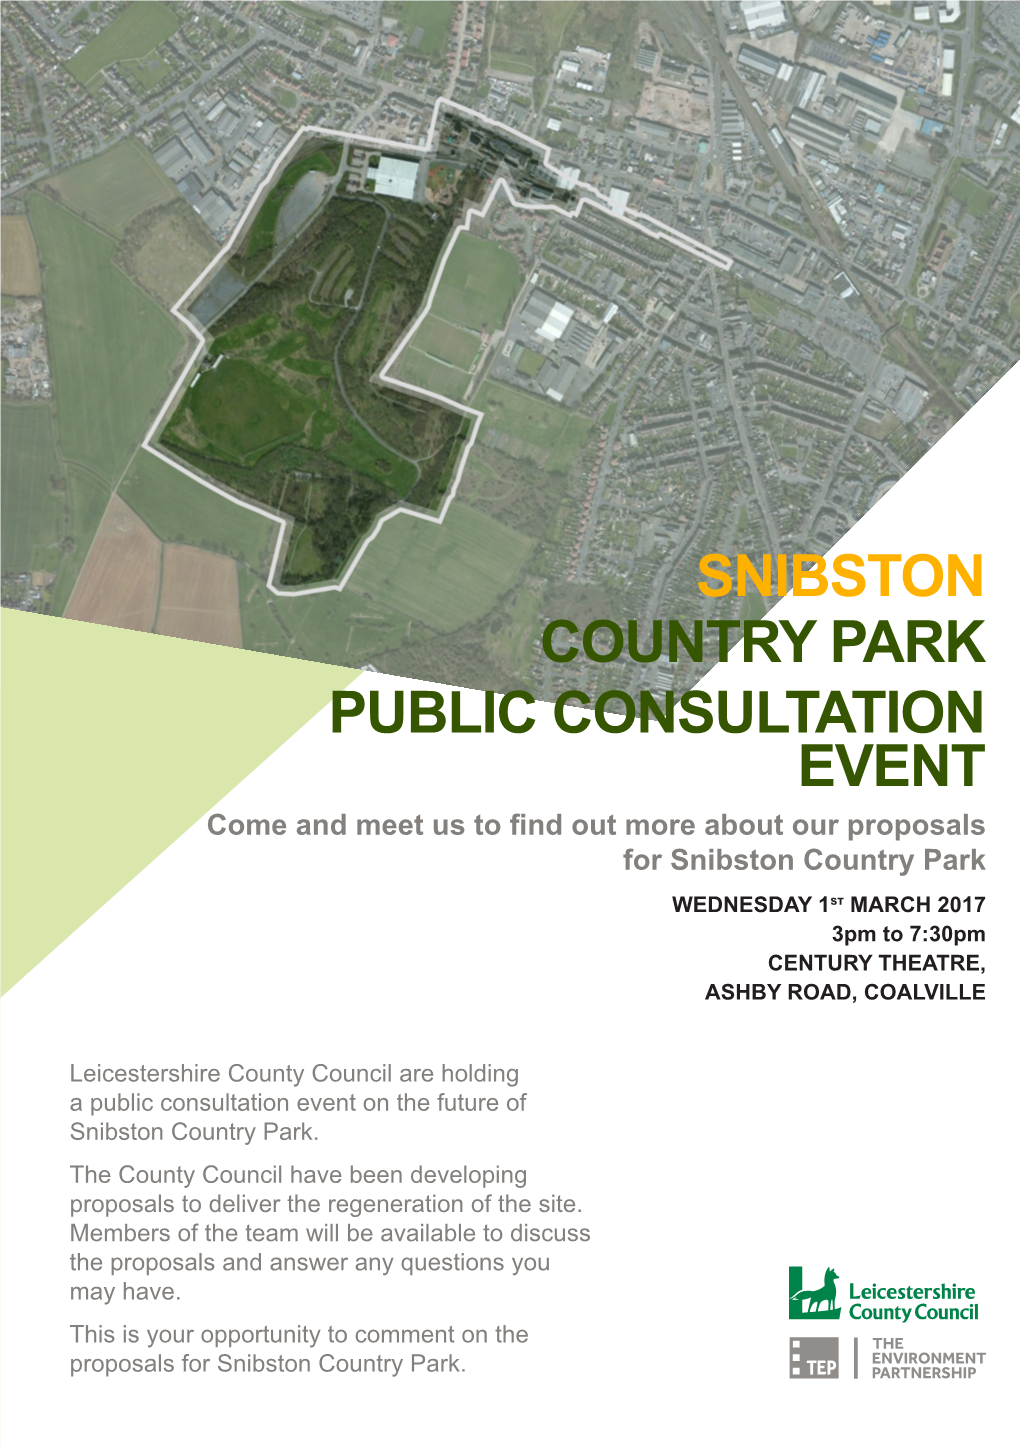 Snibston Country Park Public Consultation Event